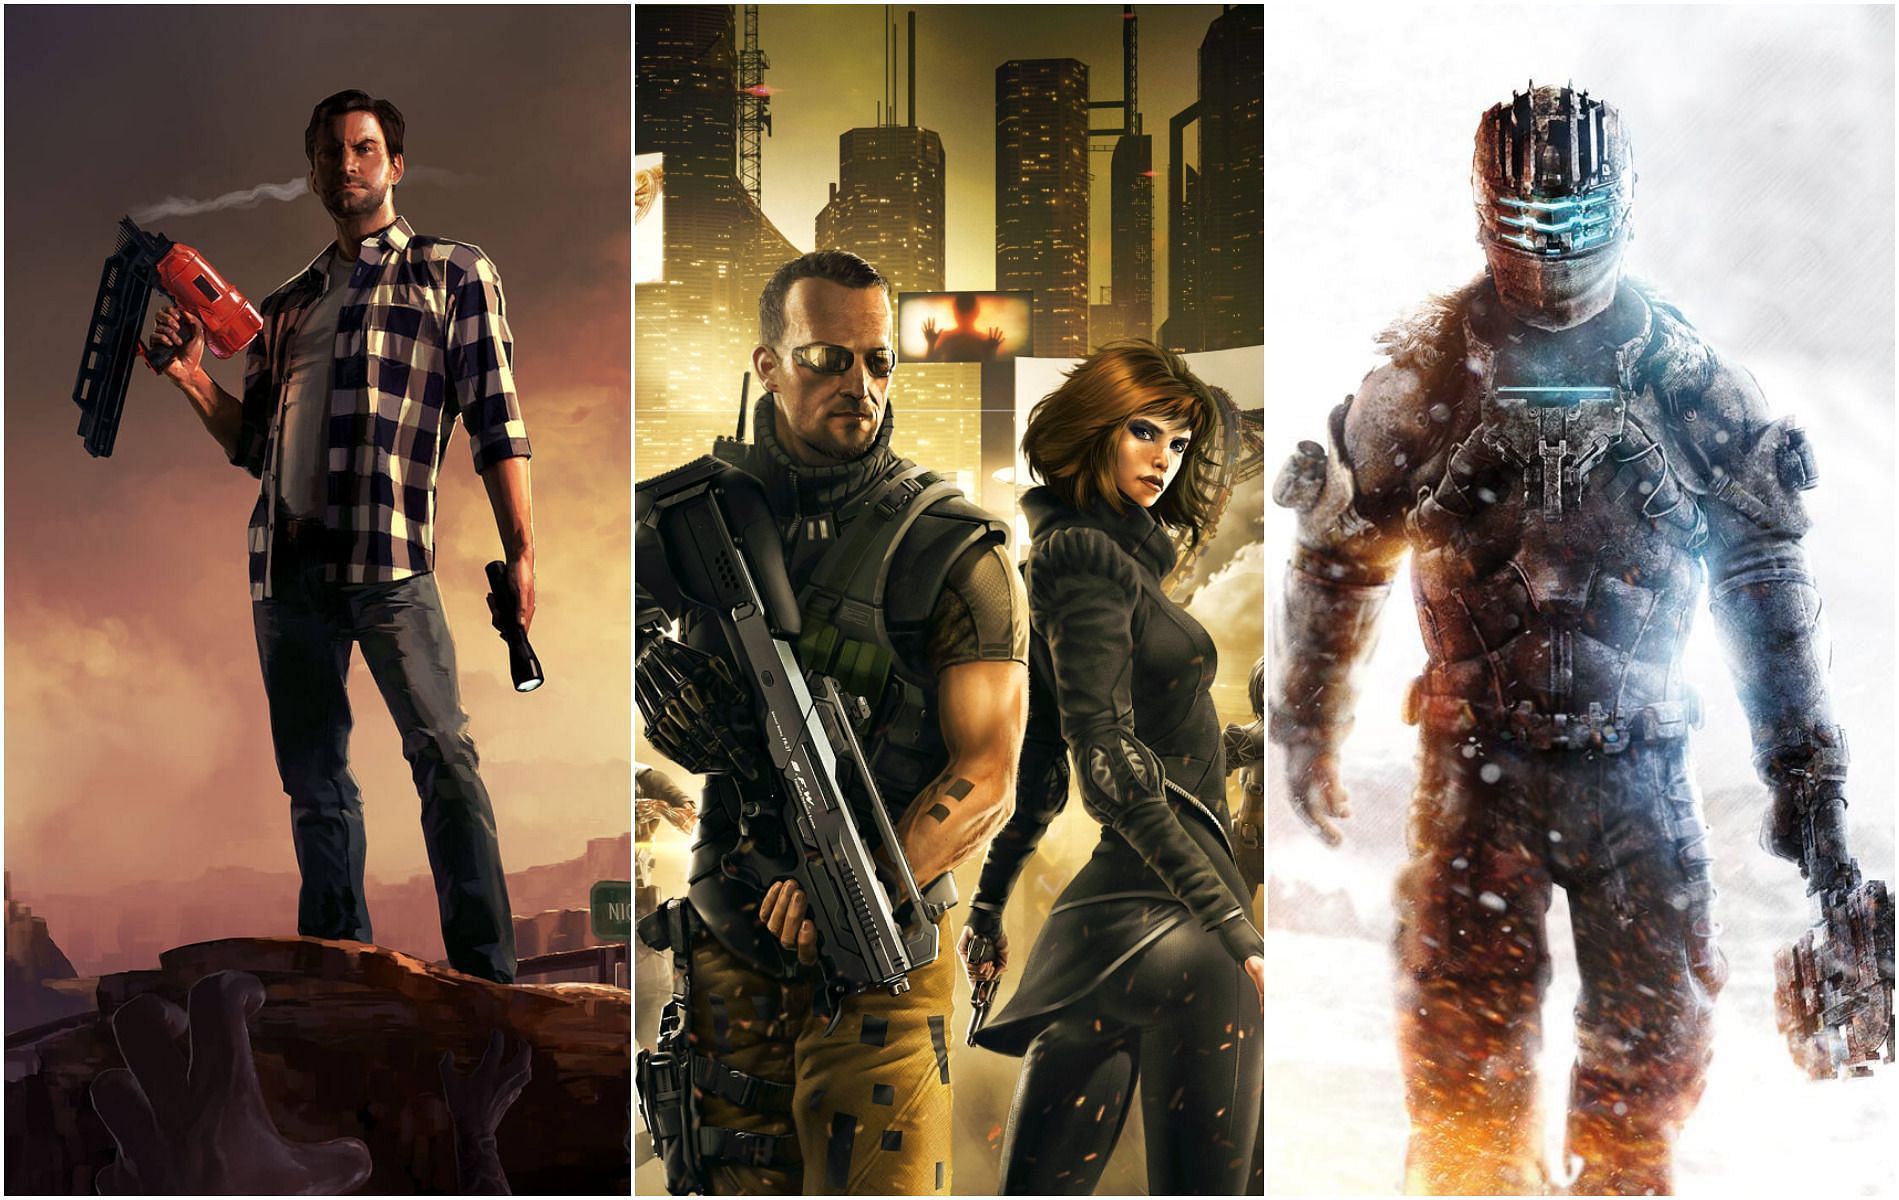 Did you enjoy any of these entries in these acclaimed video game franchises? (Images via Remedy Entertainment/Square Enix/EA)